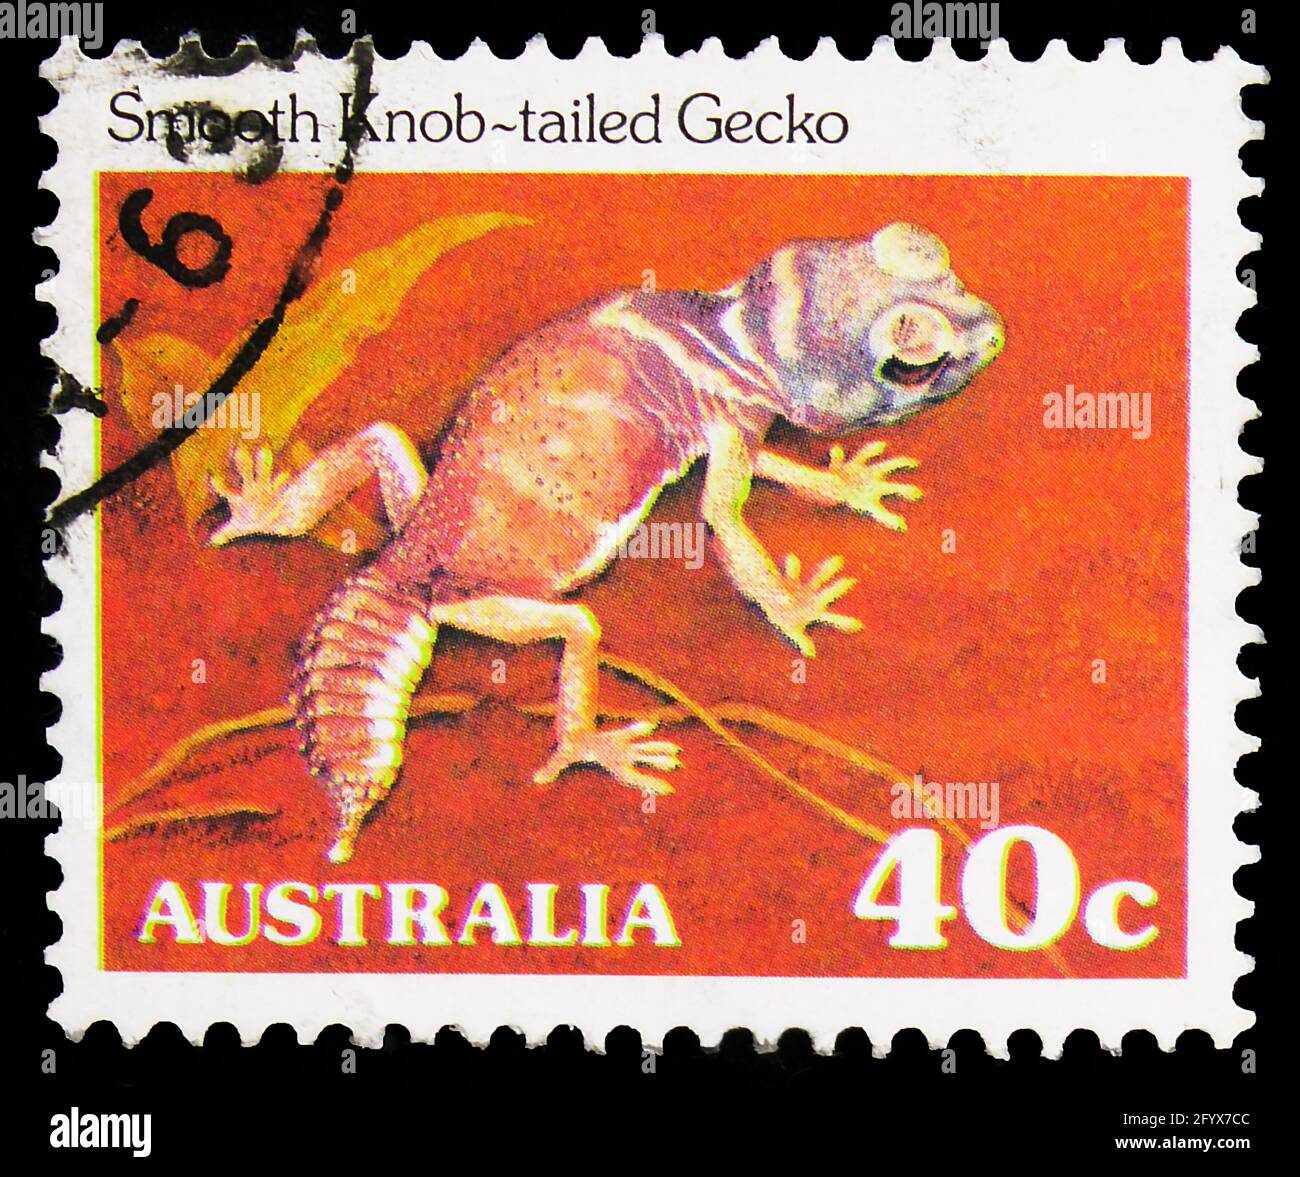 MOSCOW, RUSSIA - SEPTEMBER 27, 2019: Postage stamp printed in Australia shows Smooth Knob-tailed Gecko (Nephrurus laevis), Reptiles and Amphibians ser Stock Photo